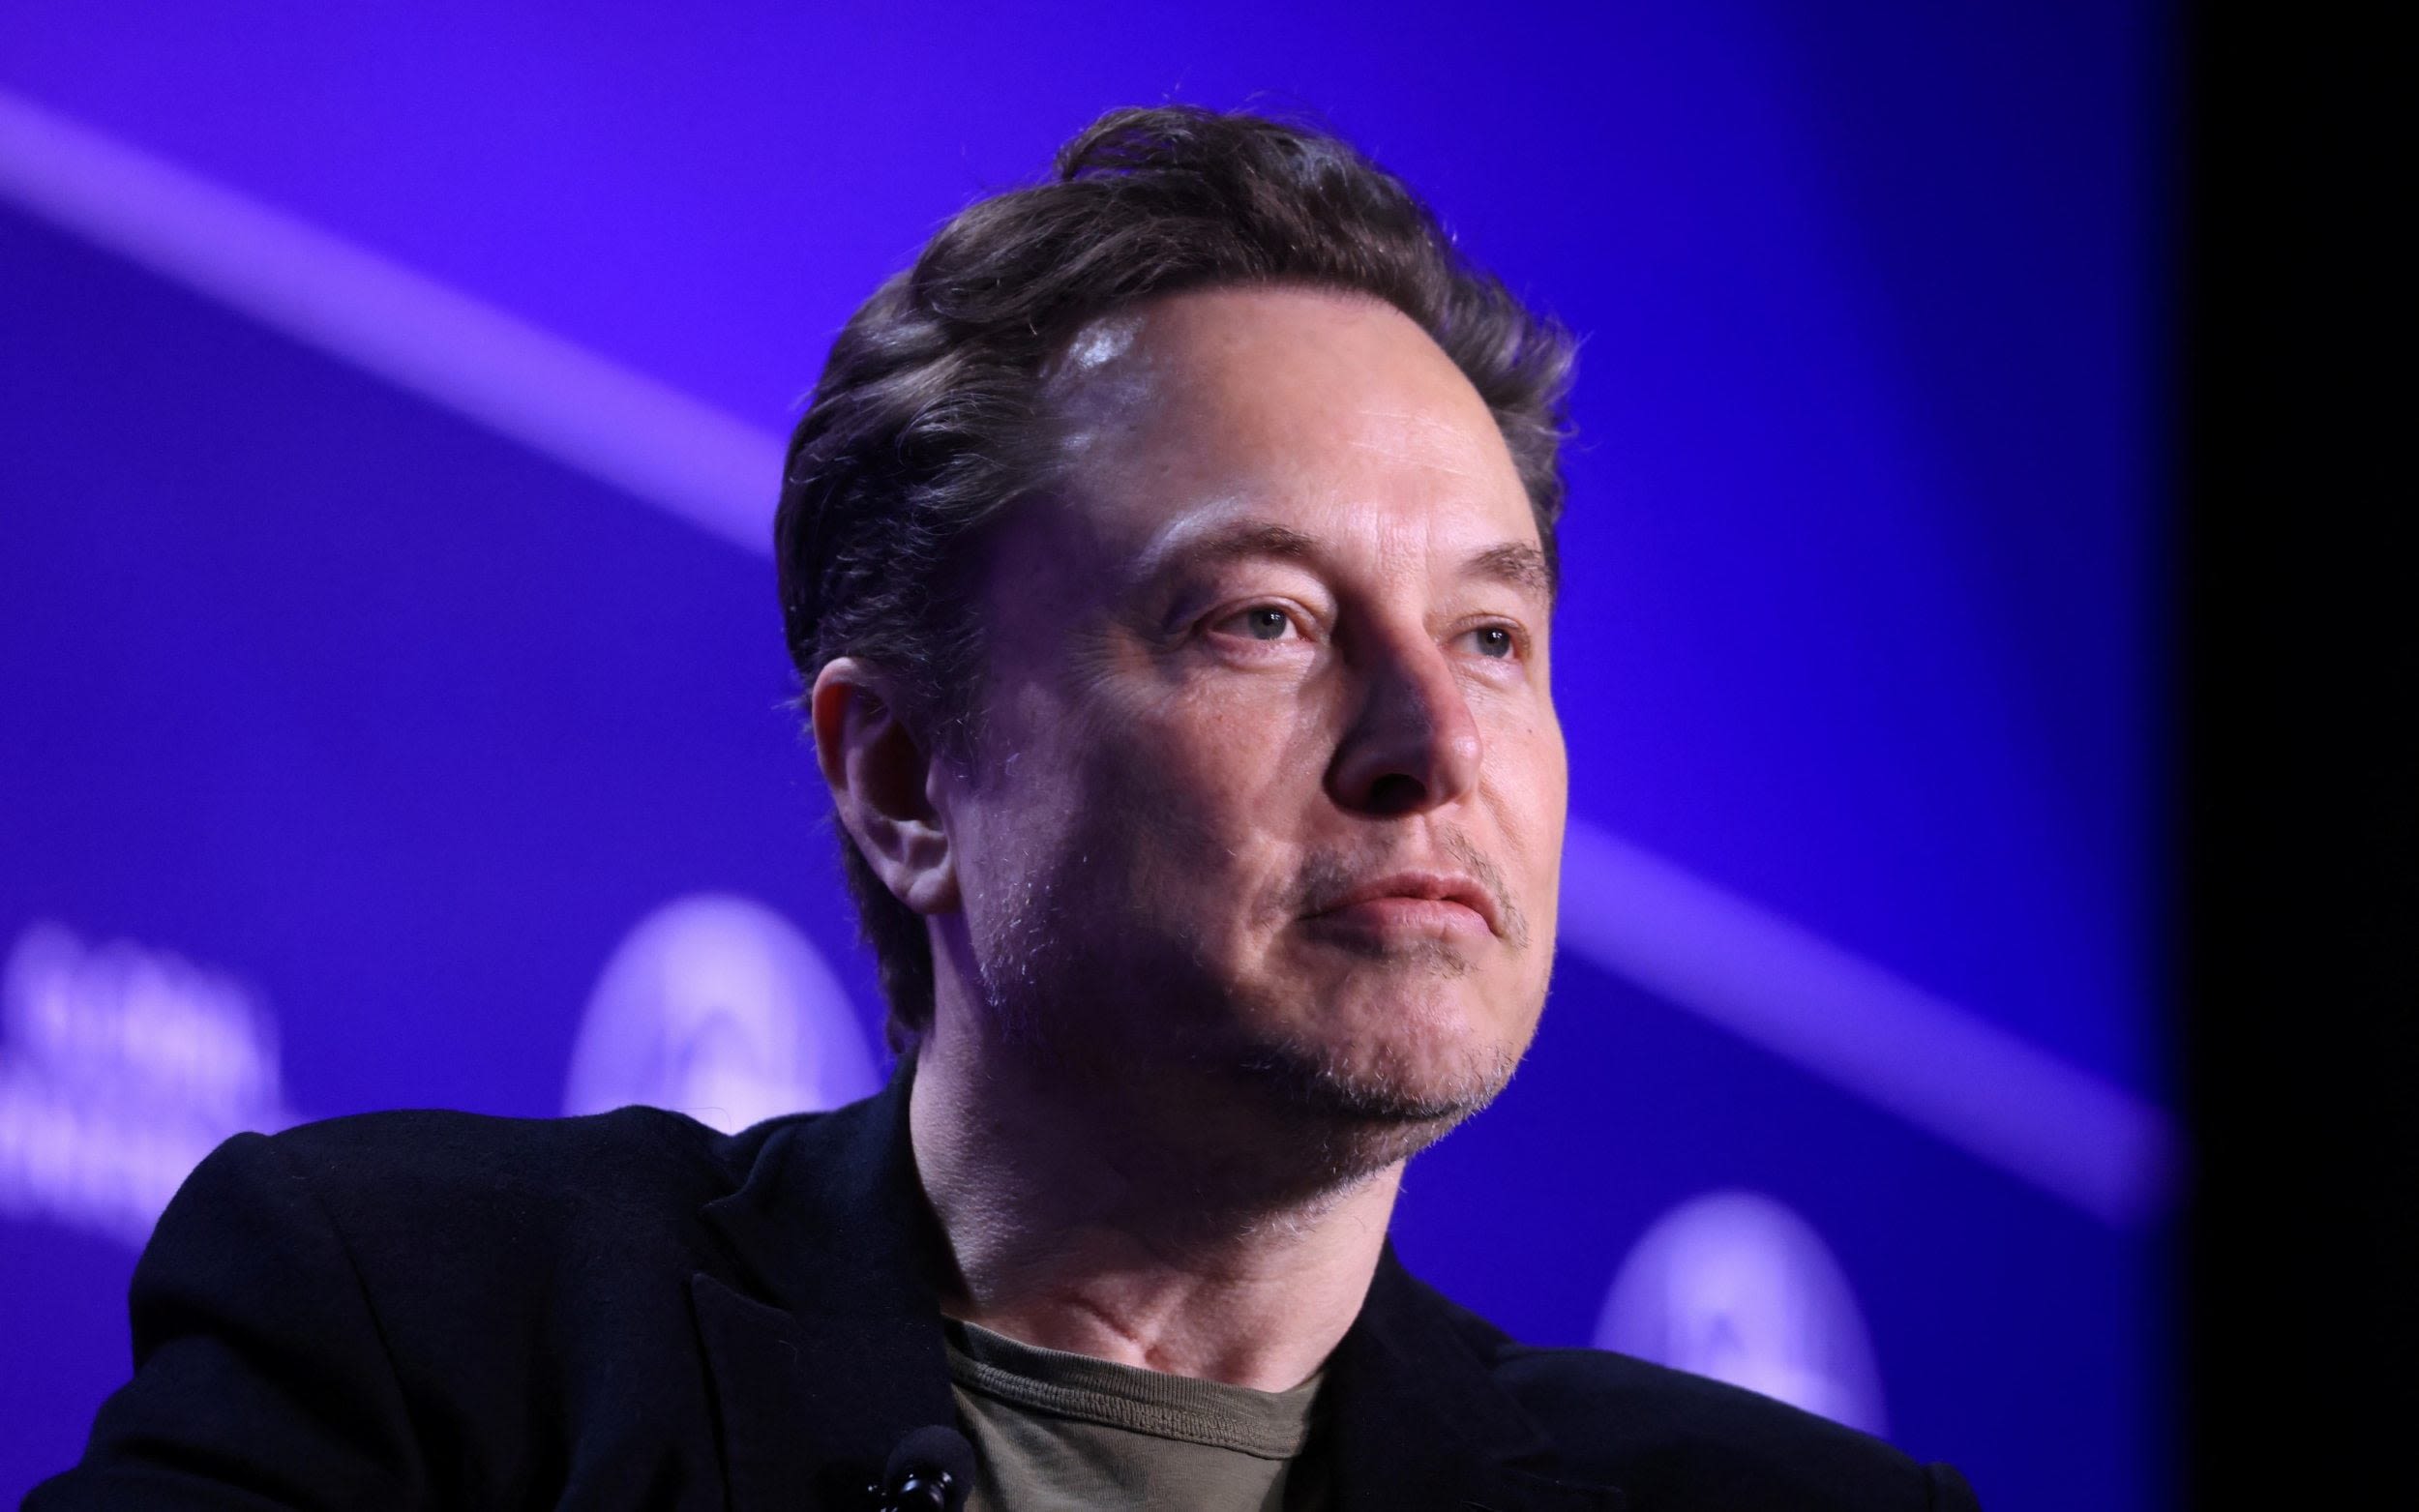 Top Tesla investor advised to reject Musk’s $56bn pay deal